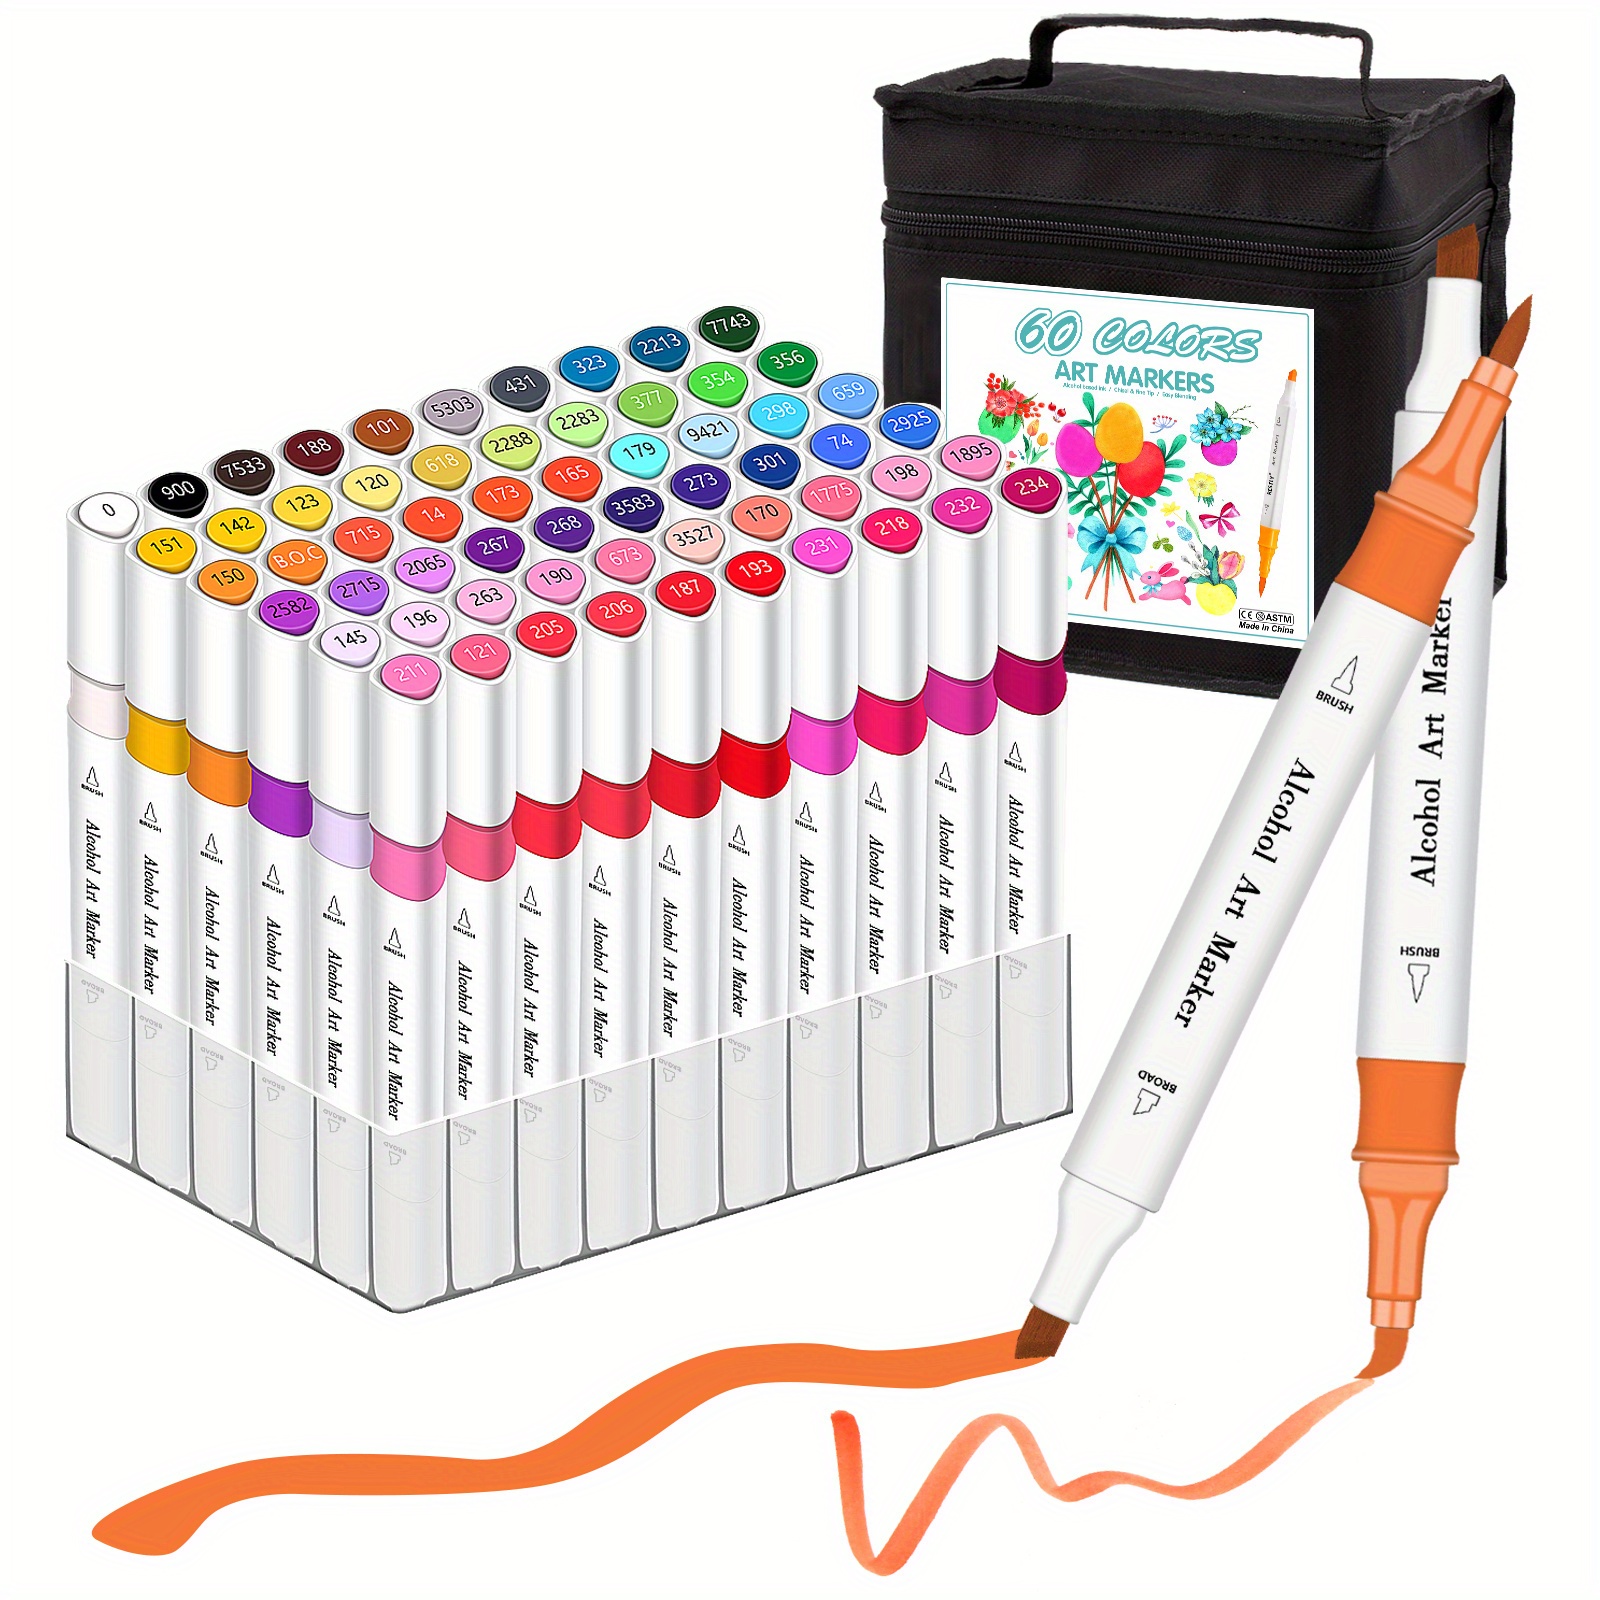 60-color Alcohol Marker Art Marker Set, Dual-head Pen Tip, Waterproof And  Quick-drying Non-toxic, Suitable For Painting, Adult Coloring, Beginners,  Dyeing, Writing, Marking, Diy Design, Can Be Used As Holiday Gifts, Student  Back-to-school Supplies